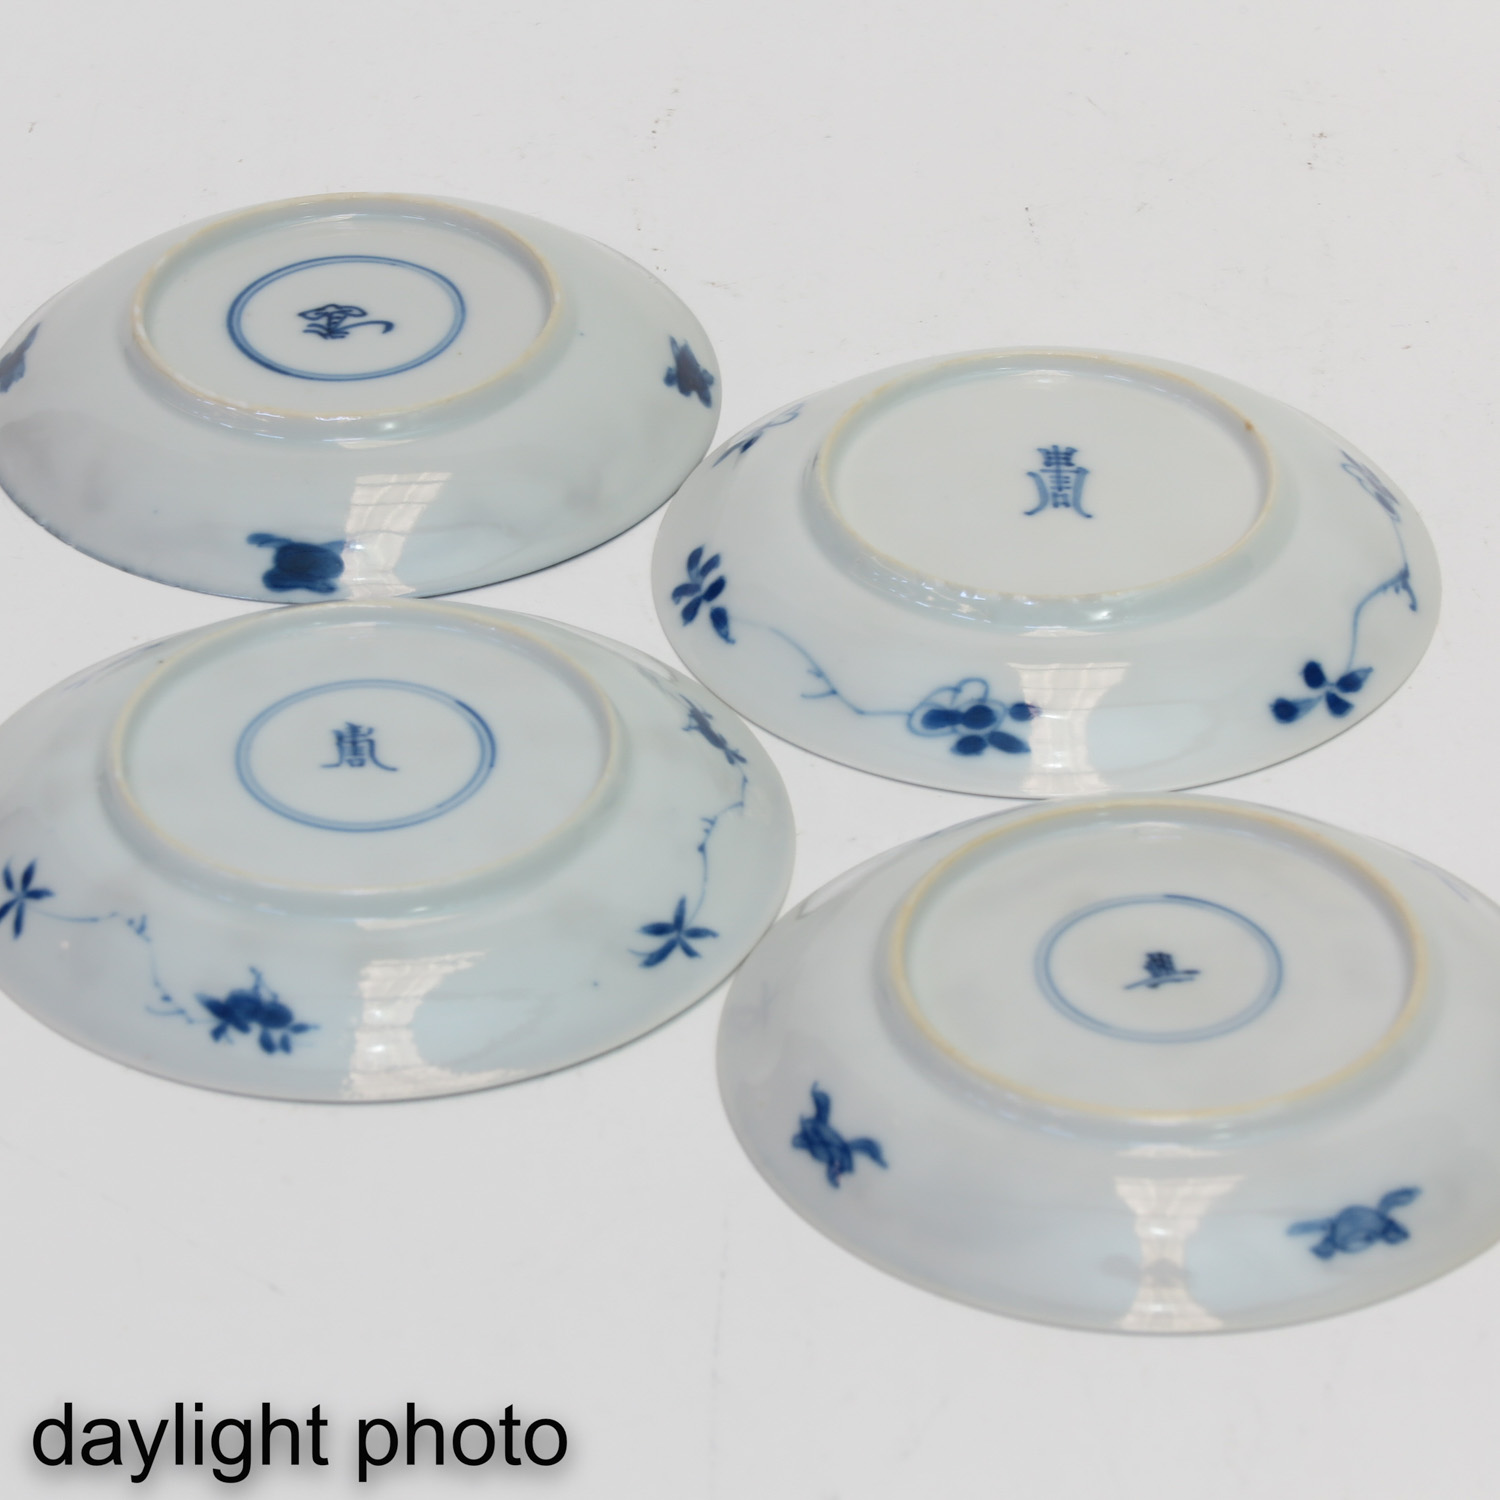 A Collection of 4 Small Blue and White Plates - Image 8 of 10